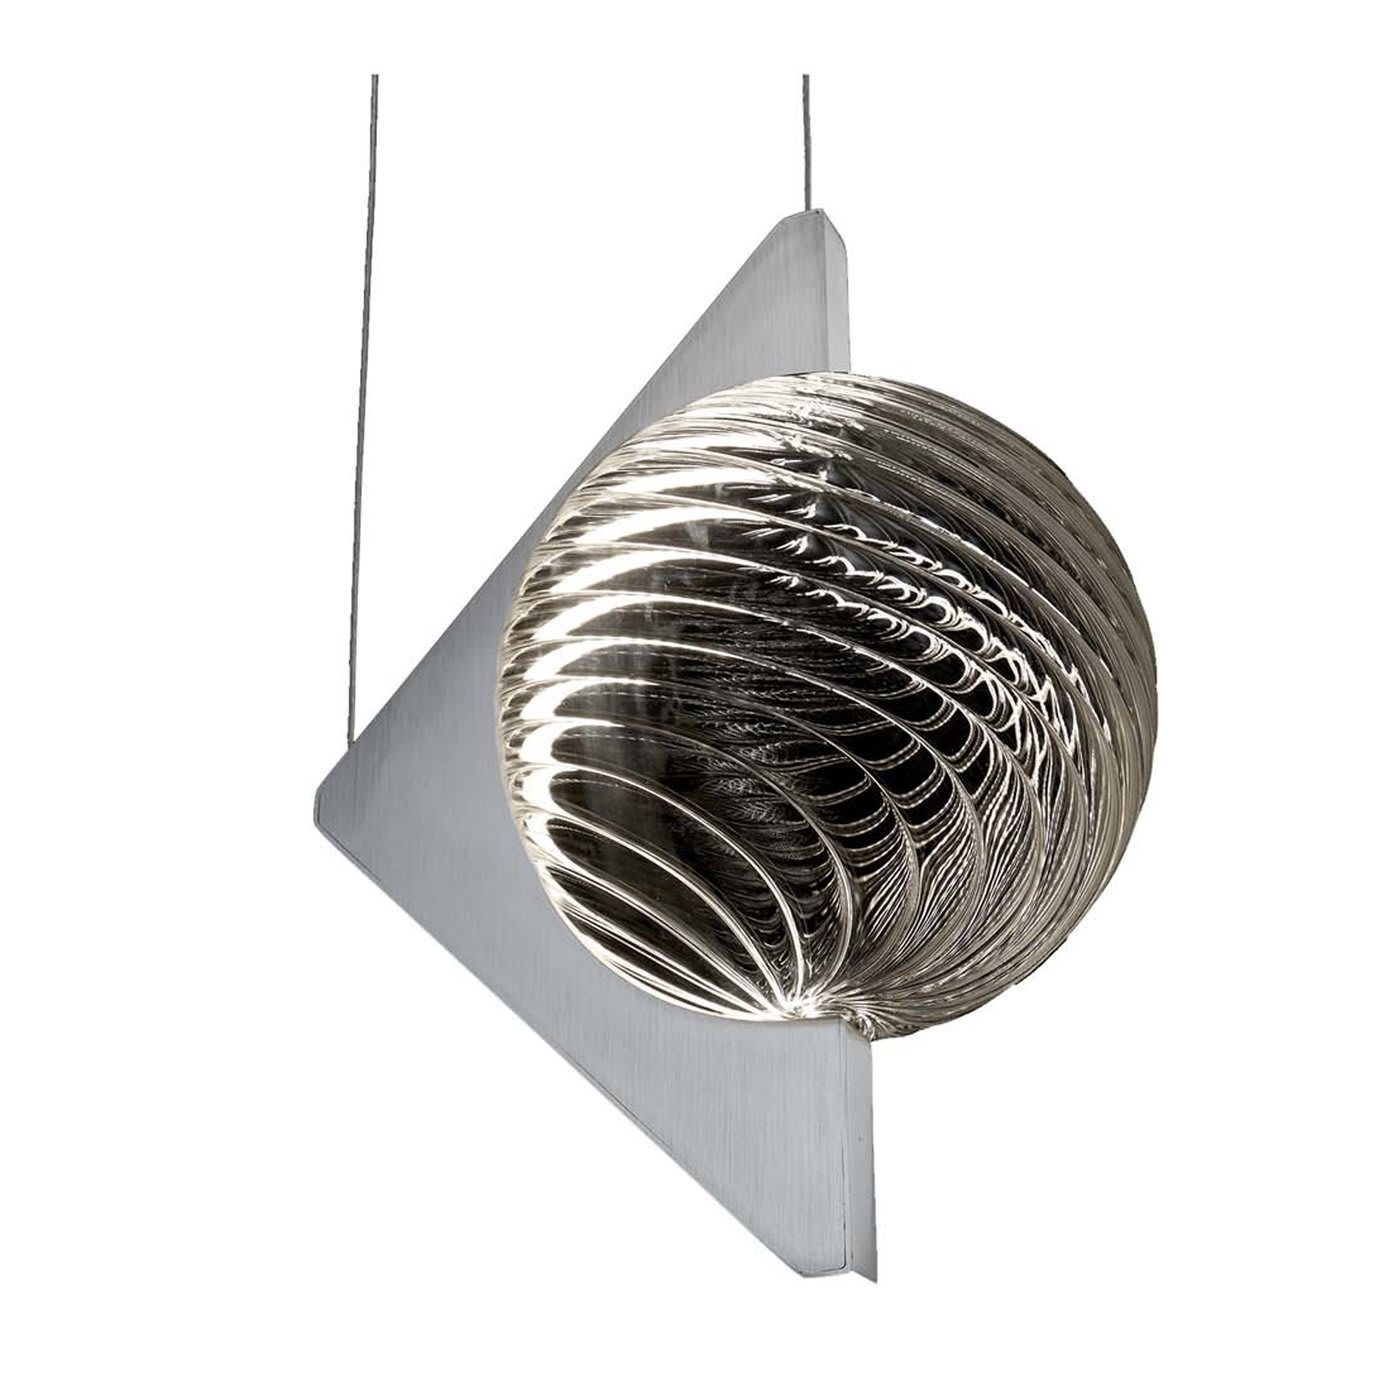 Oz Stainless Steel Ceiling Lamp - Aggiolight